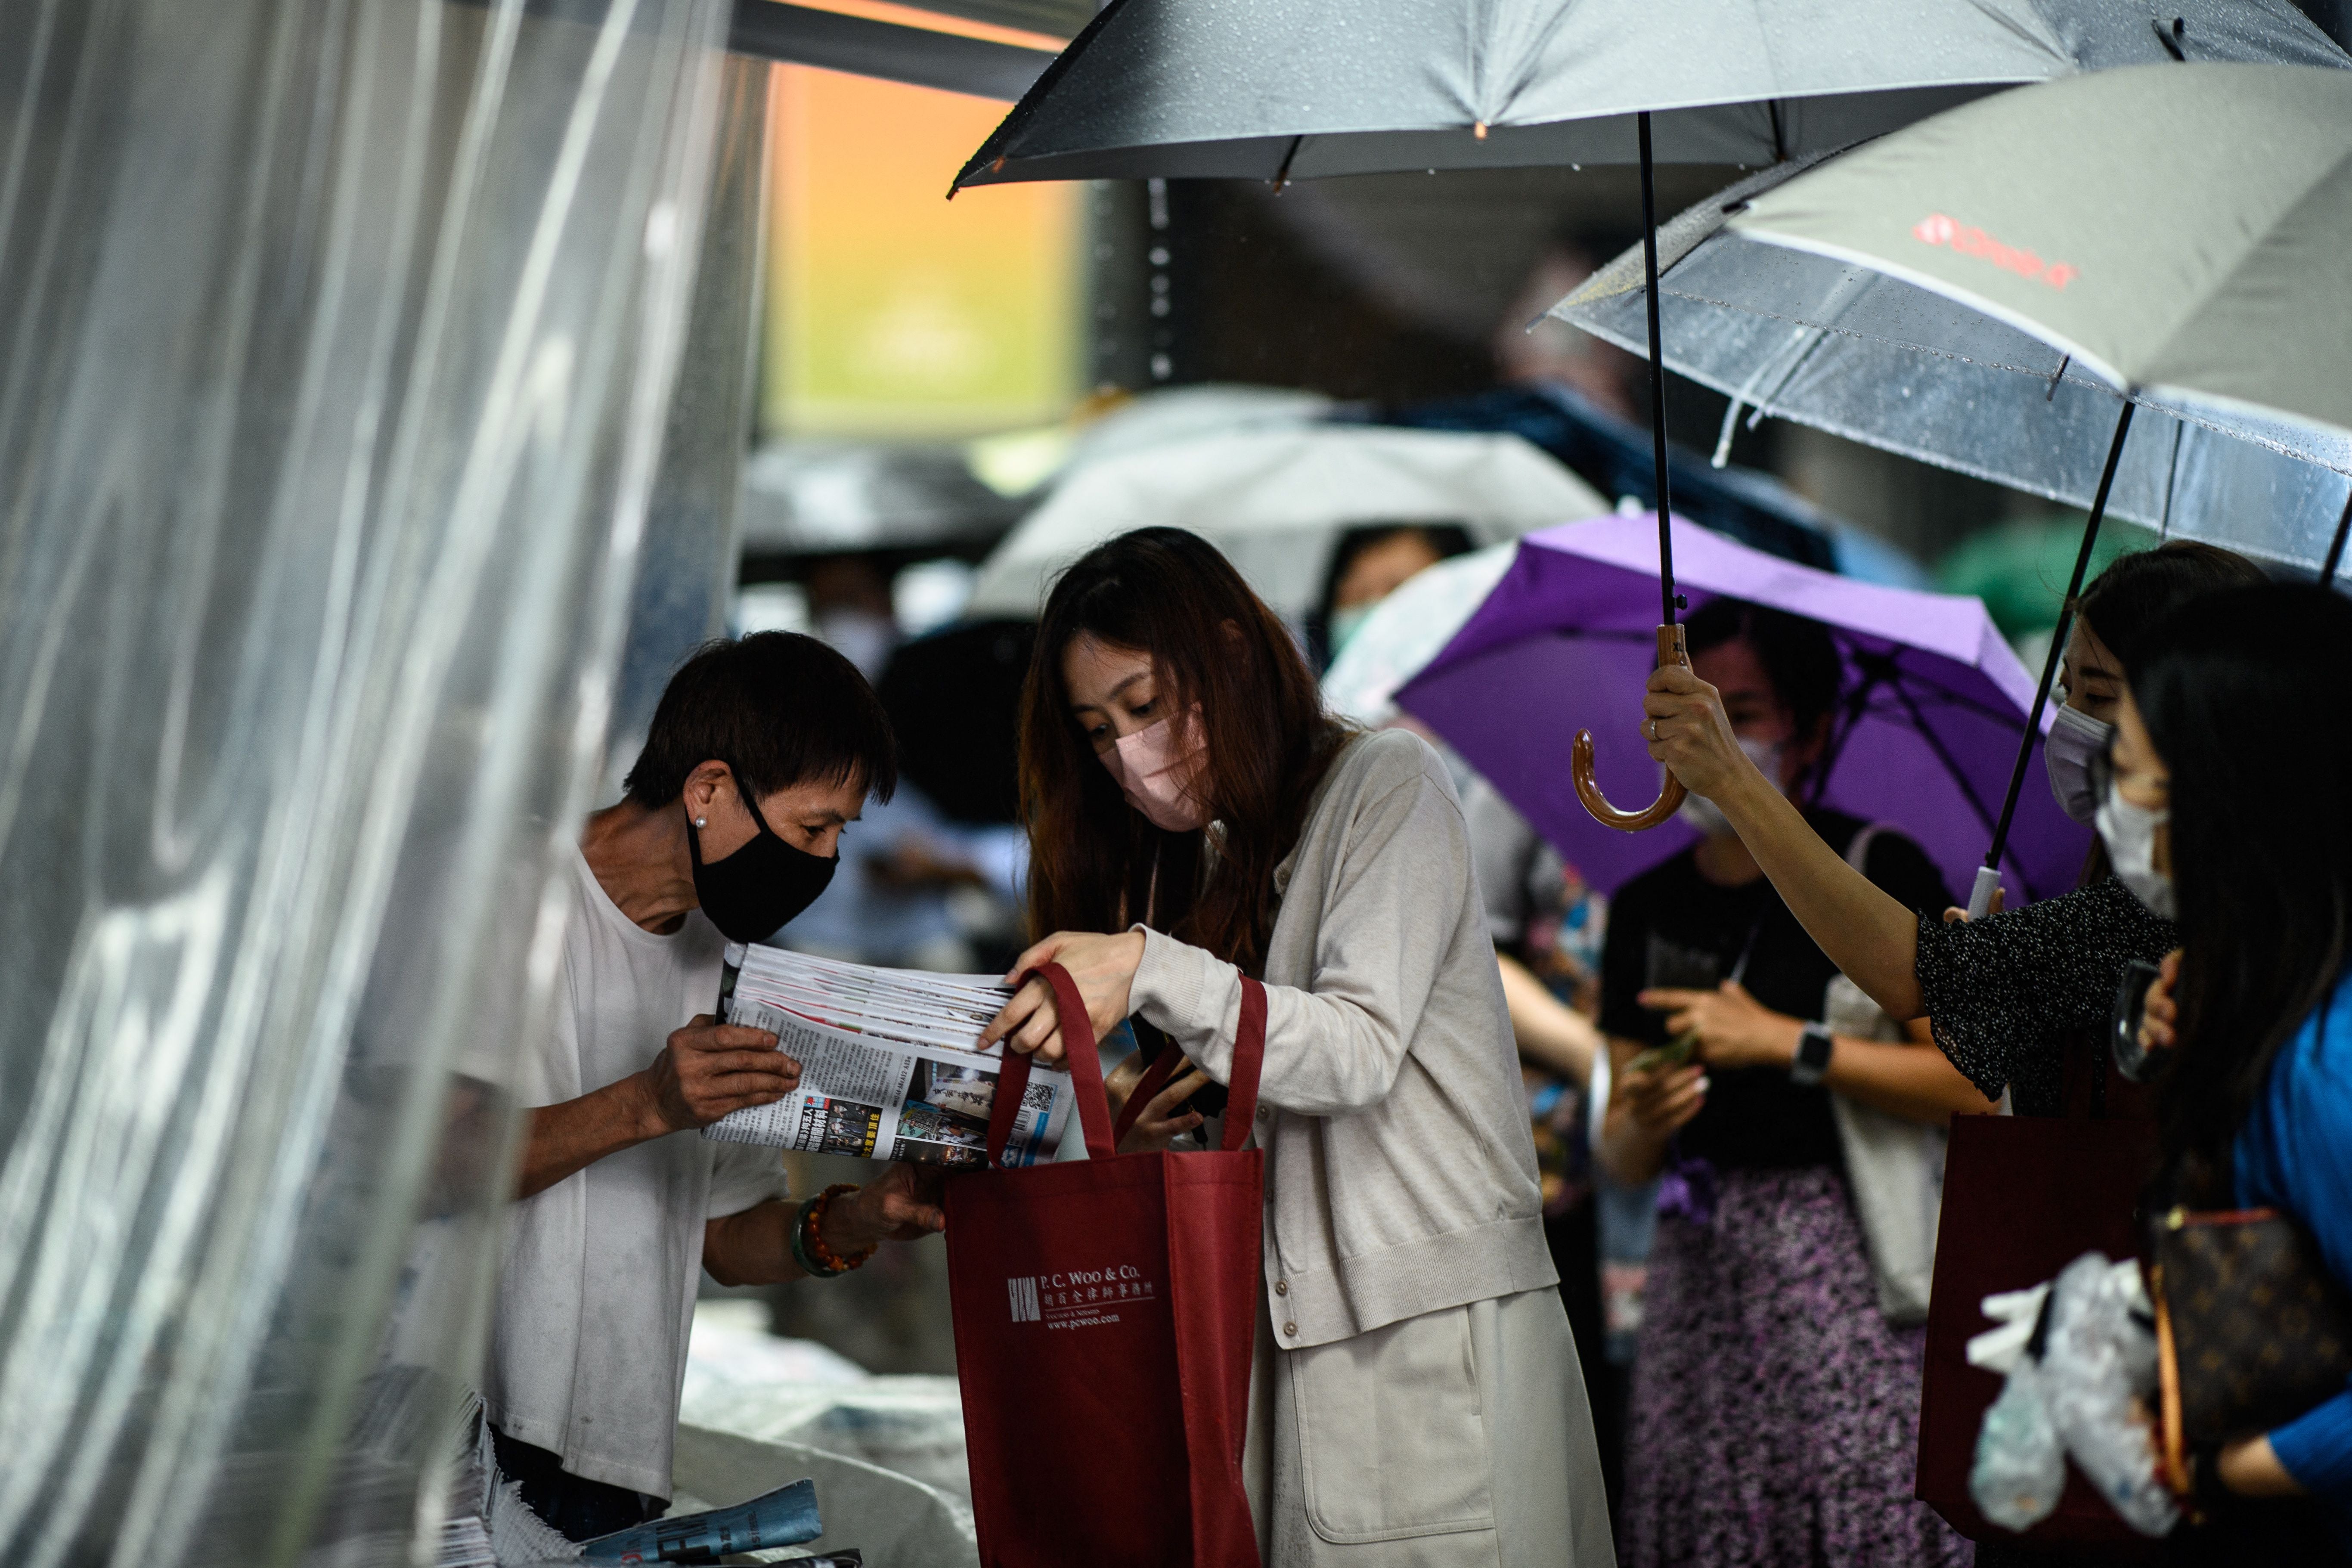 A customer buys the final issue of the Apple Daily newspaper in Hong Kong on 24 June, 2021.